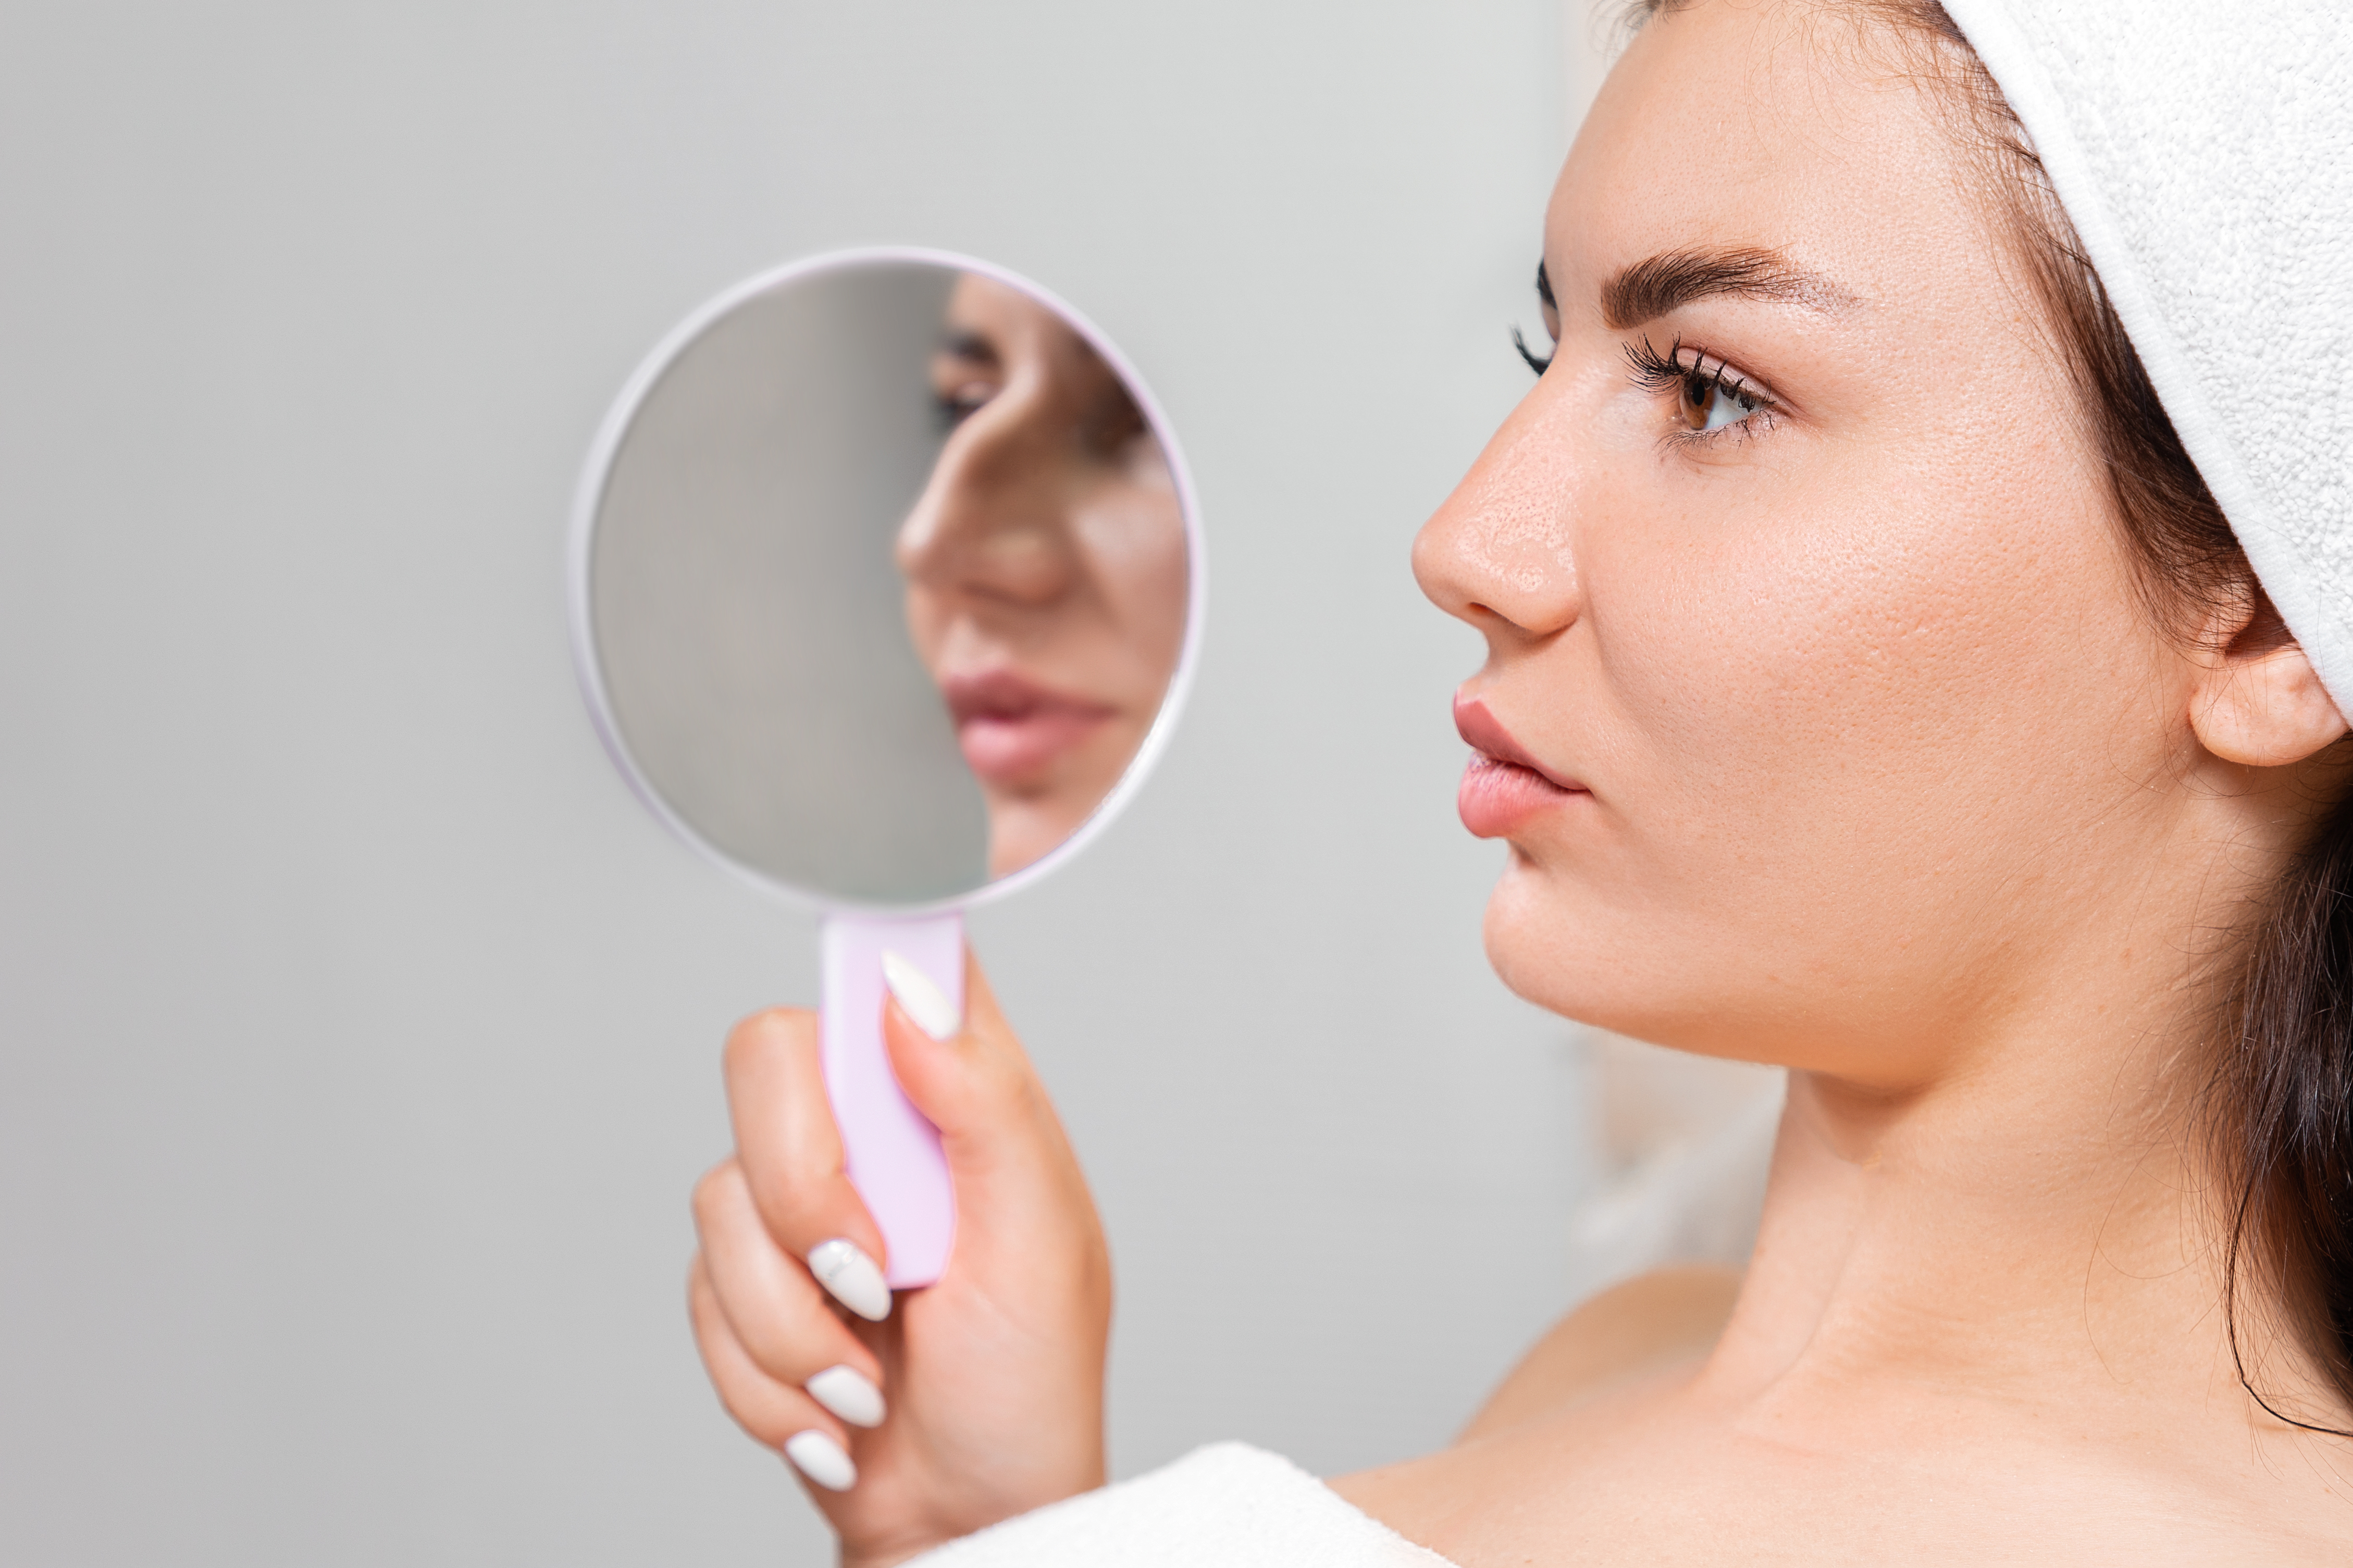 A woman holds a mirror with an aquiline nose.  Comparison of results before and after plastic surgery